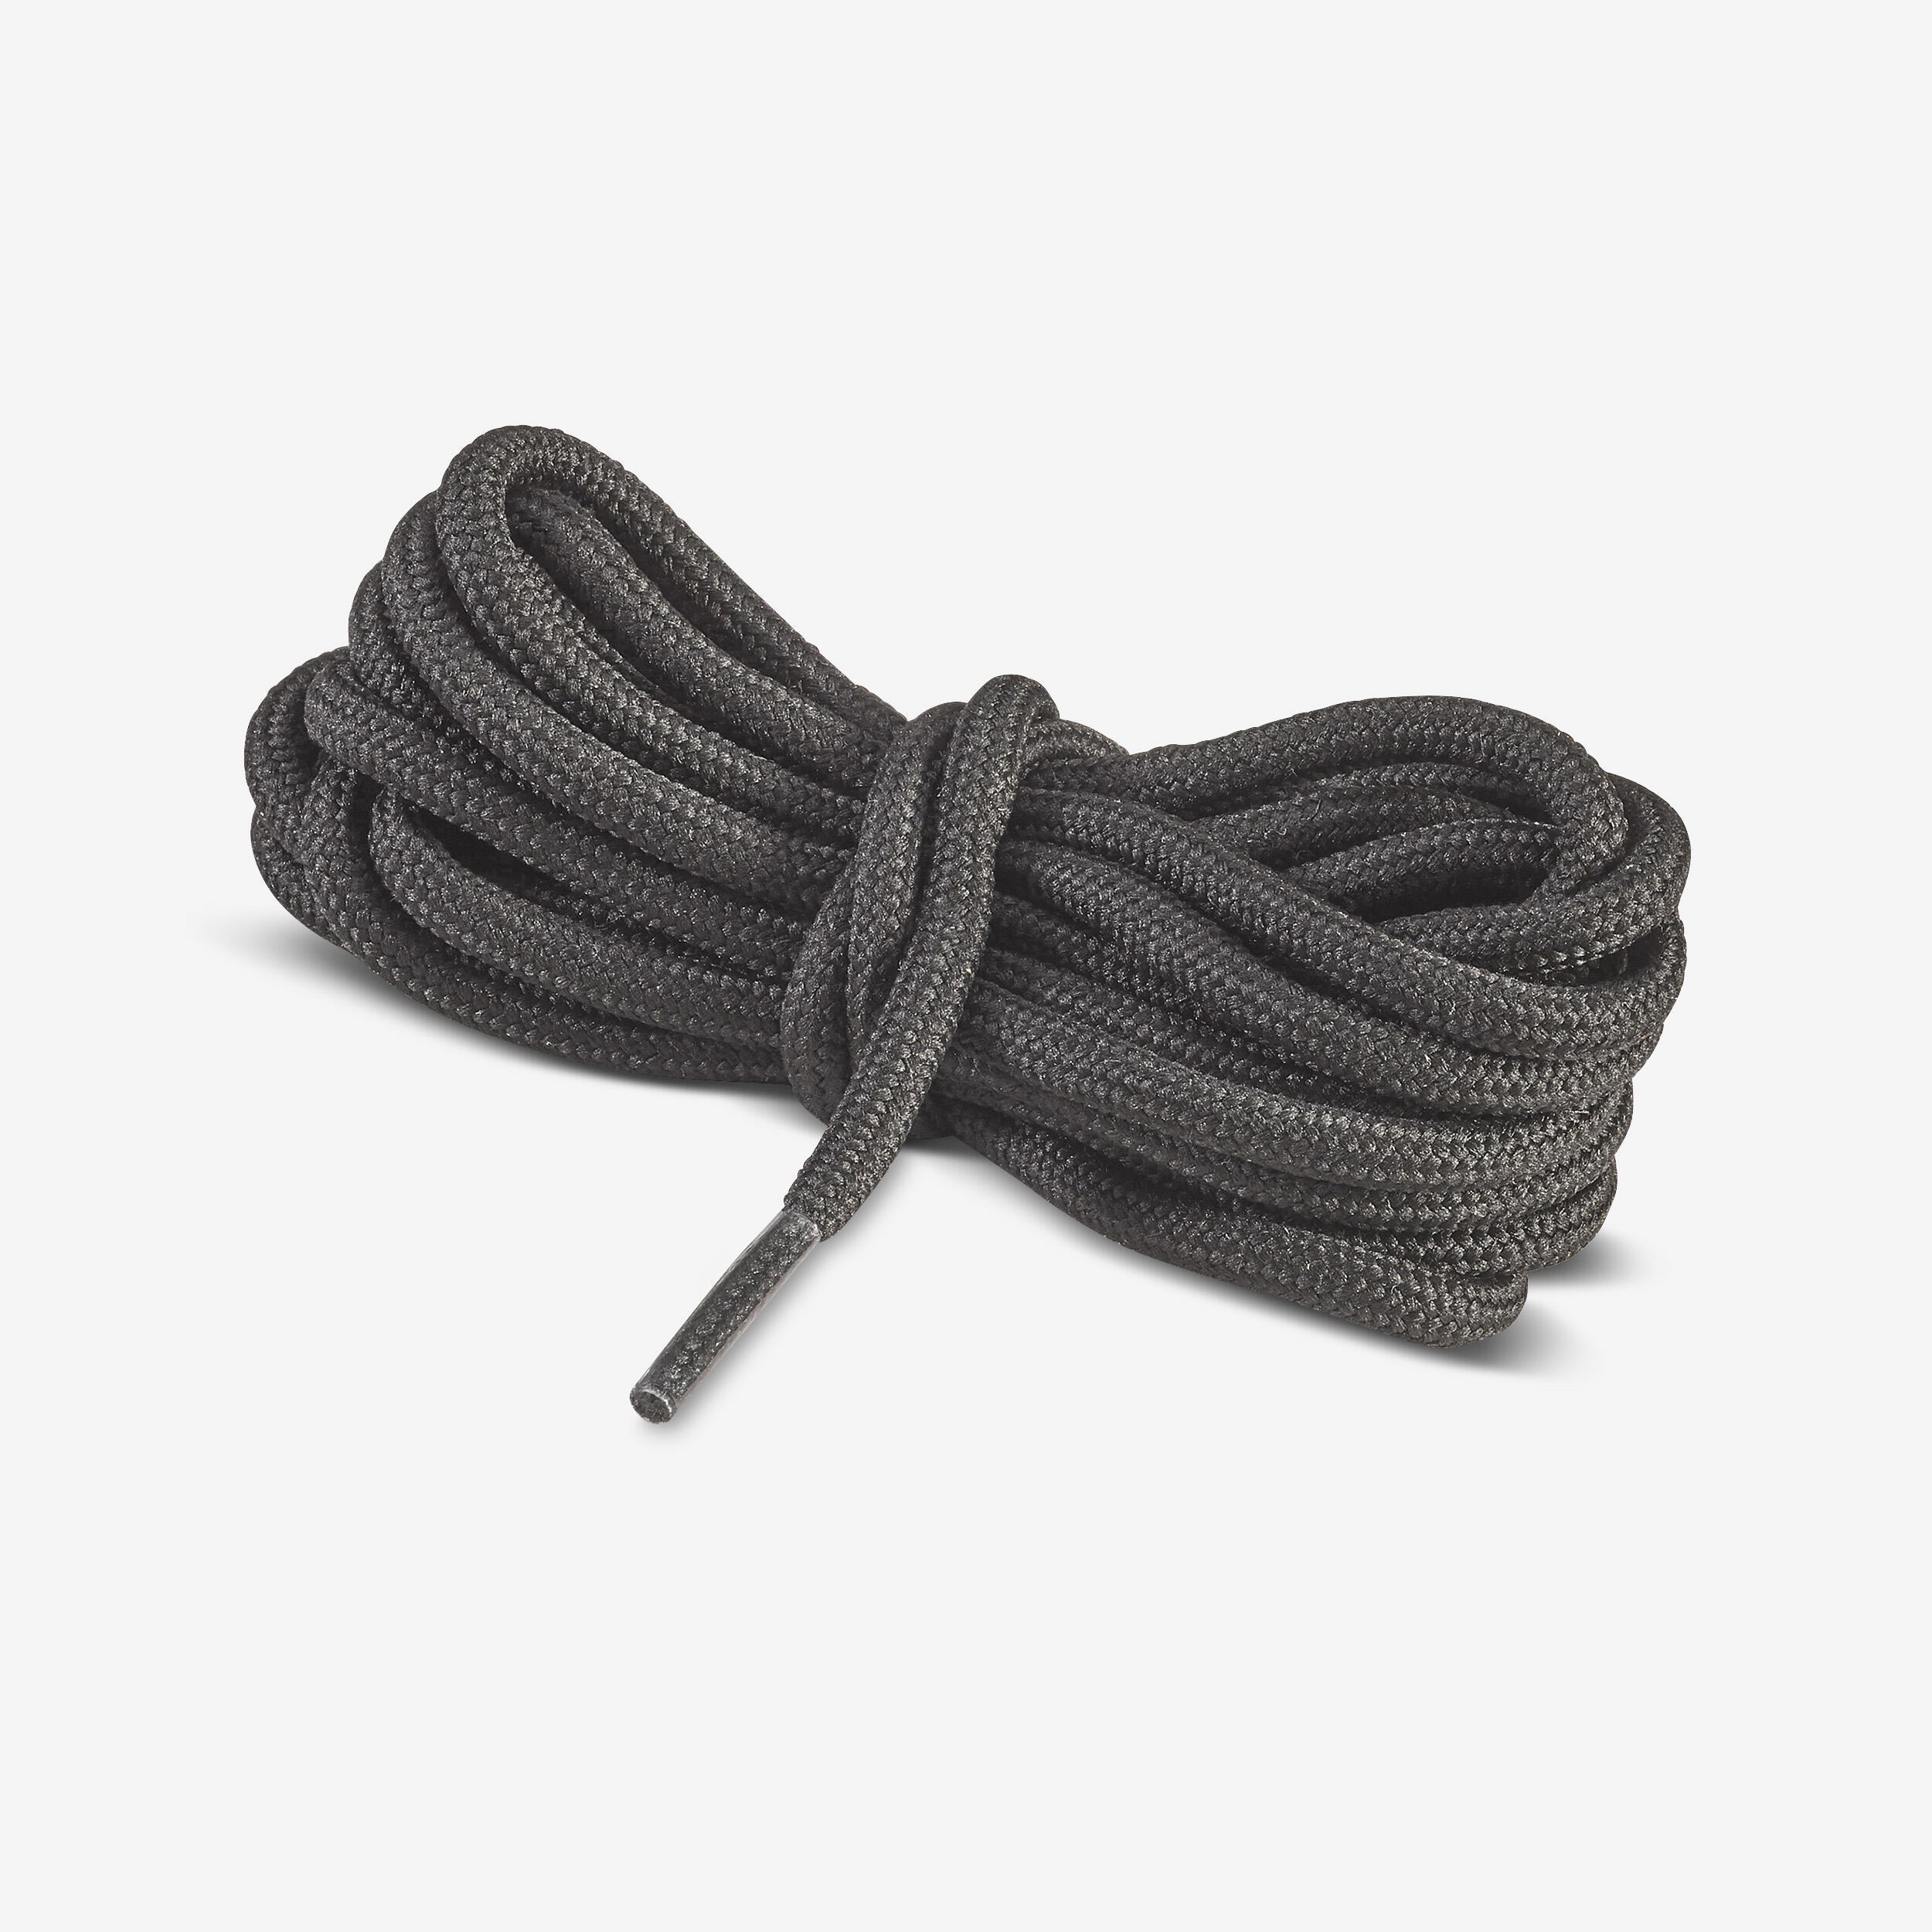 Hiking round laces - FORCLAZ